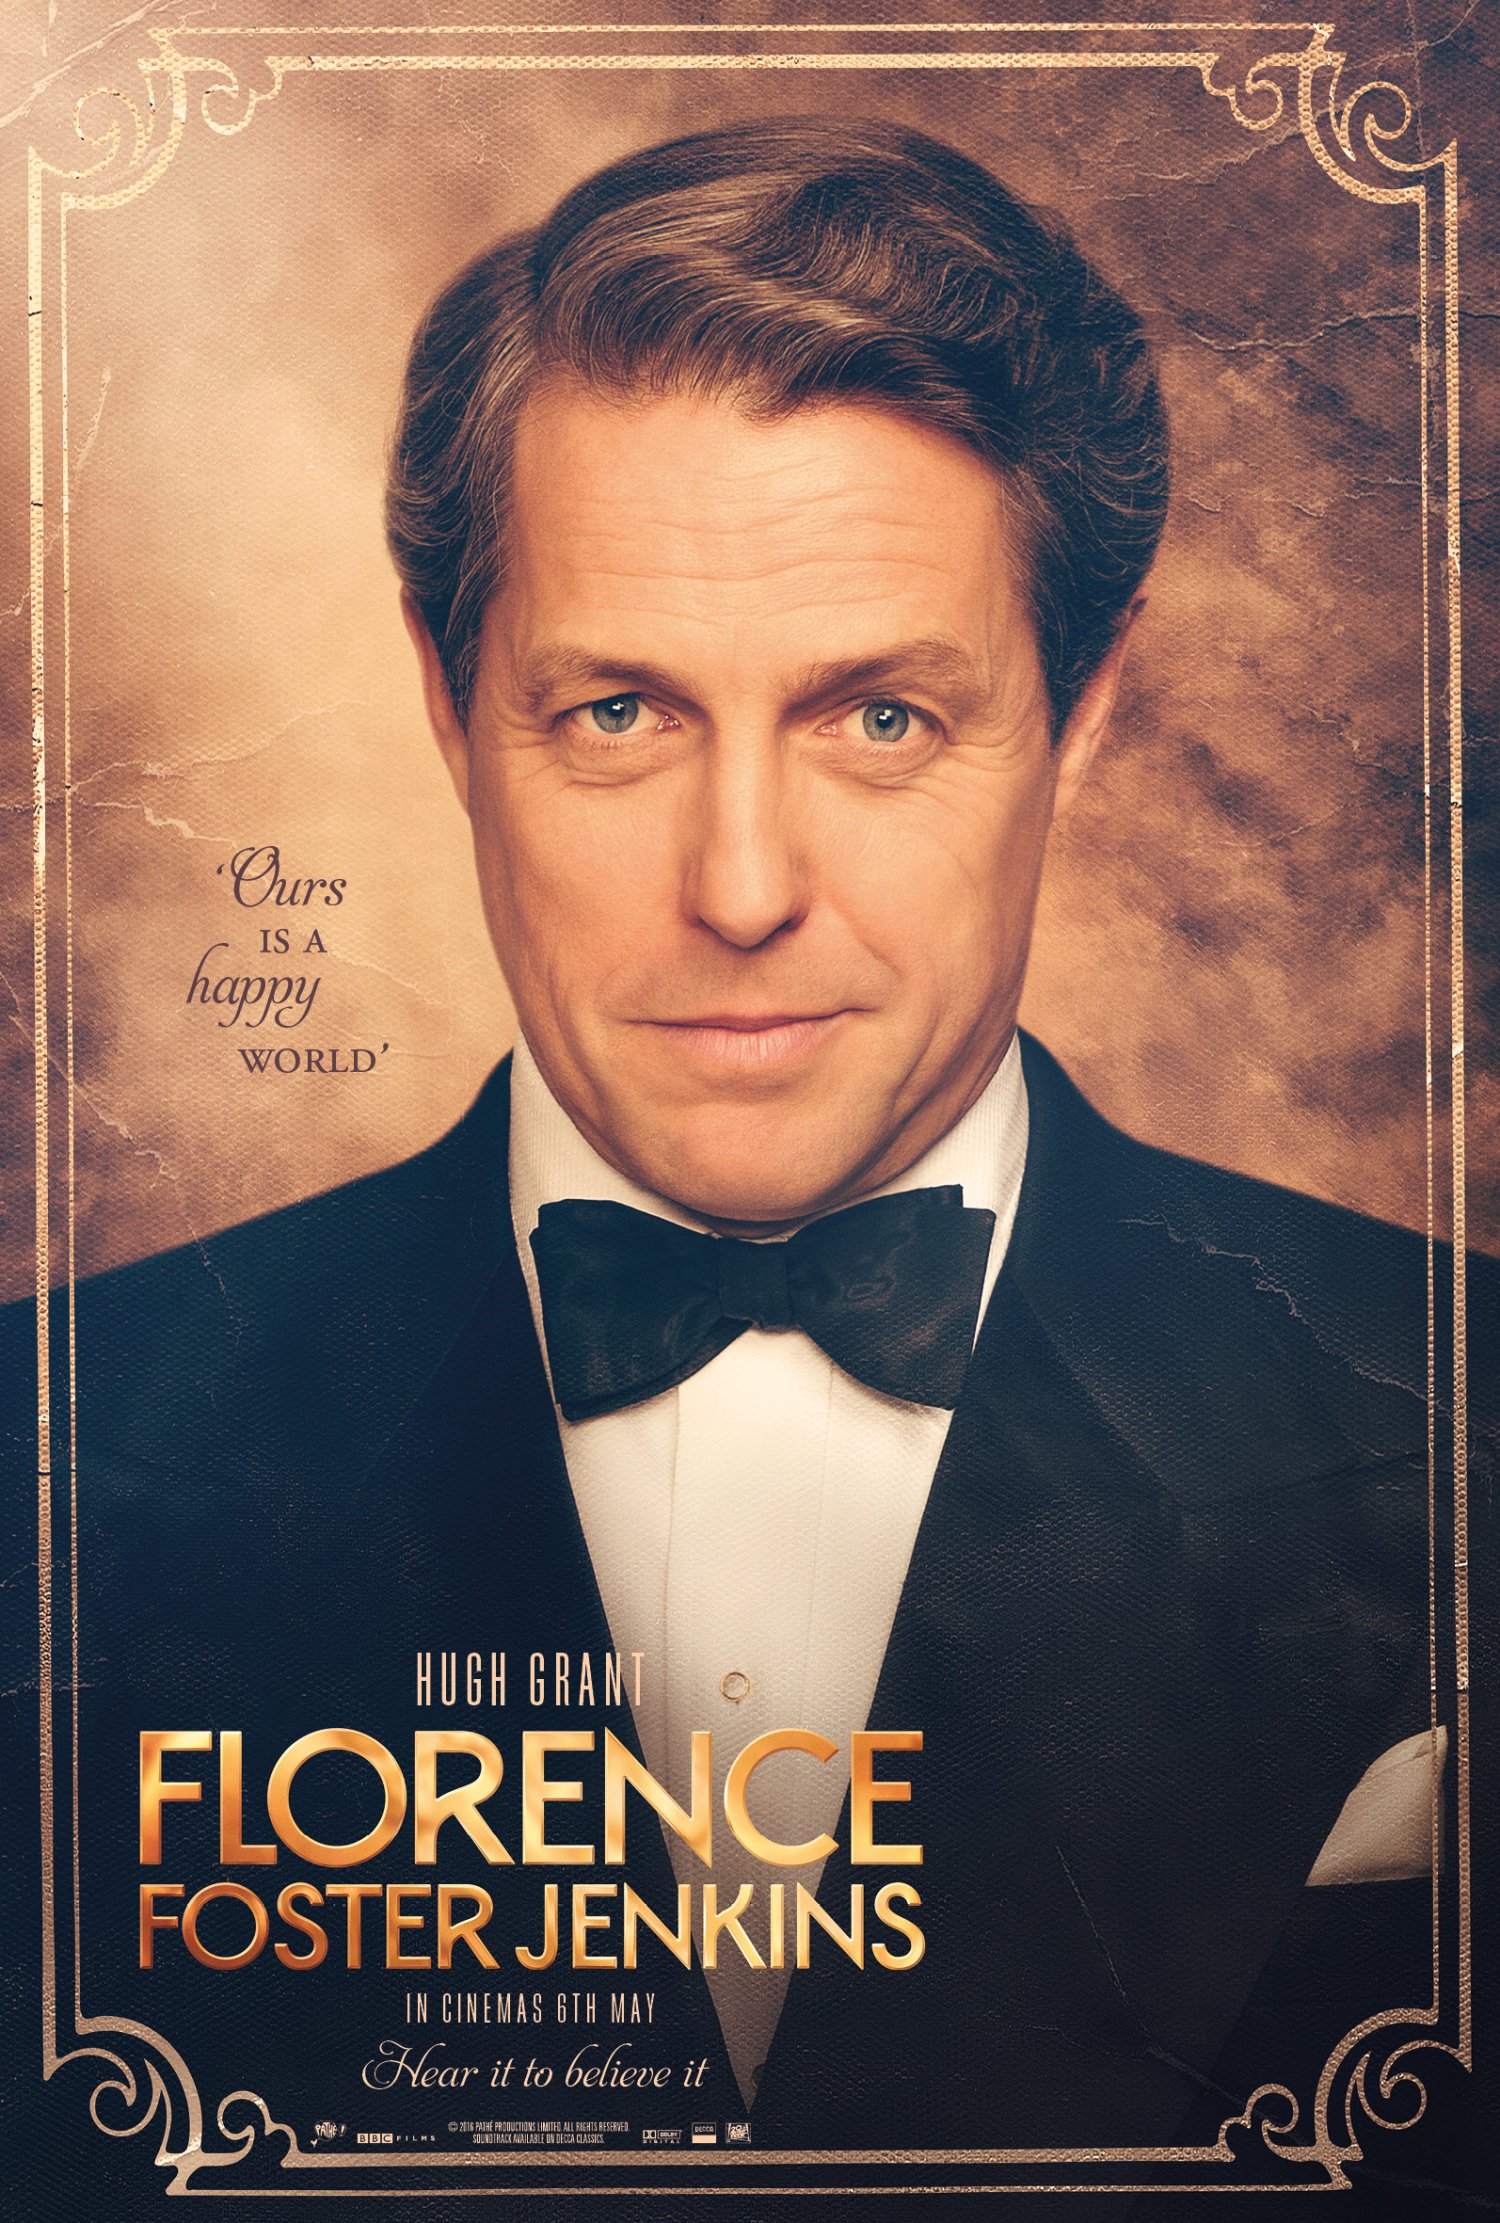 Florence Foster Jenkins pic